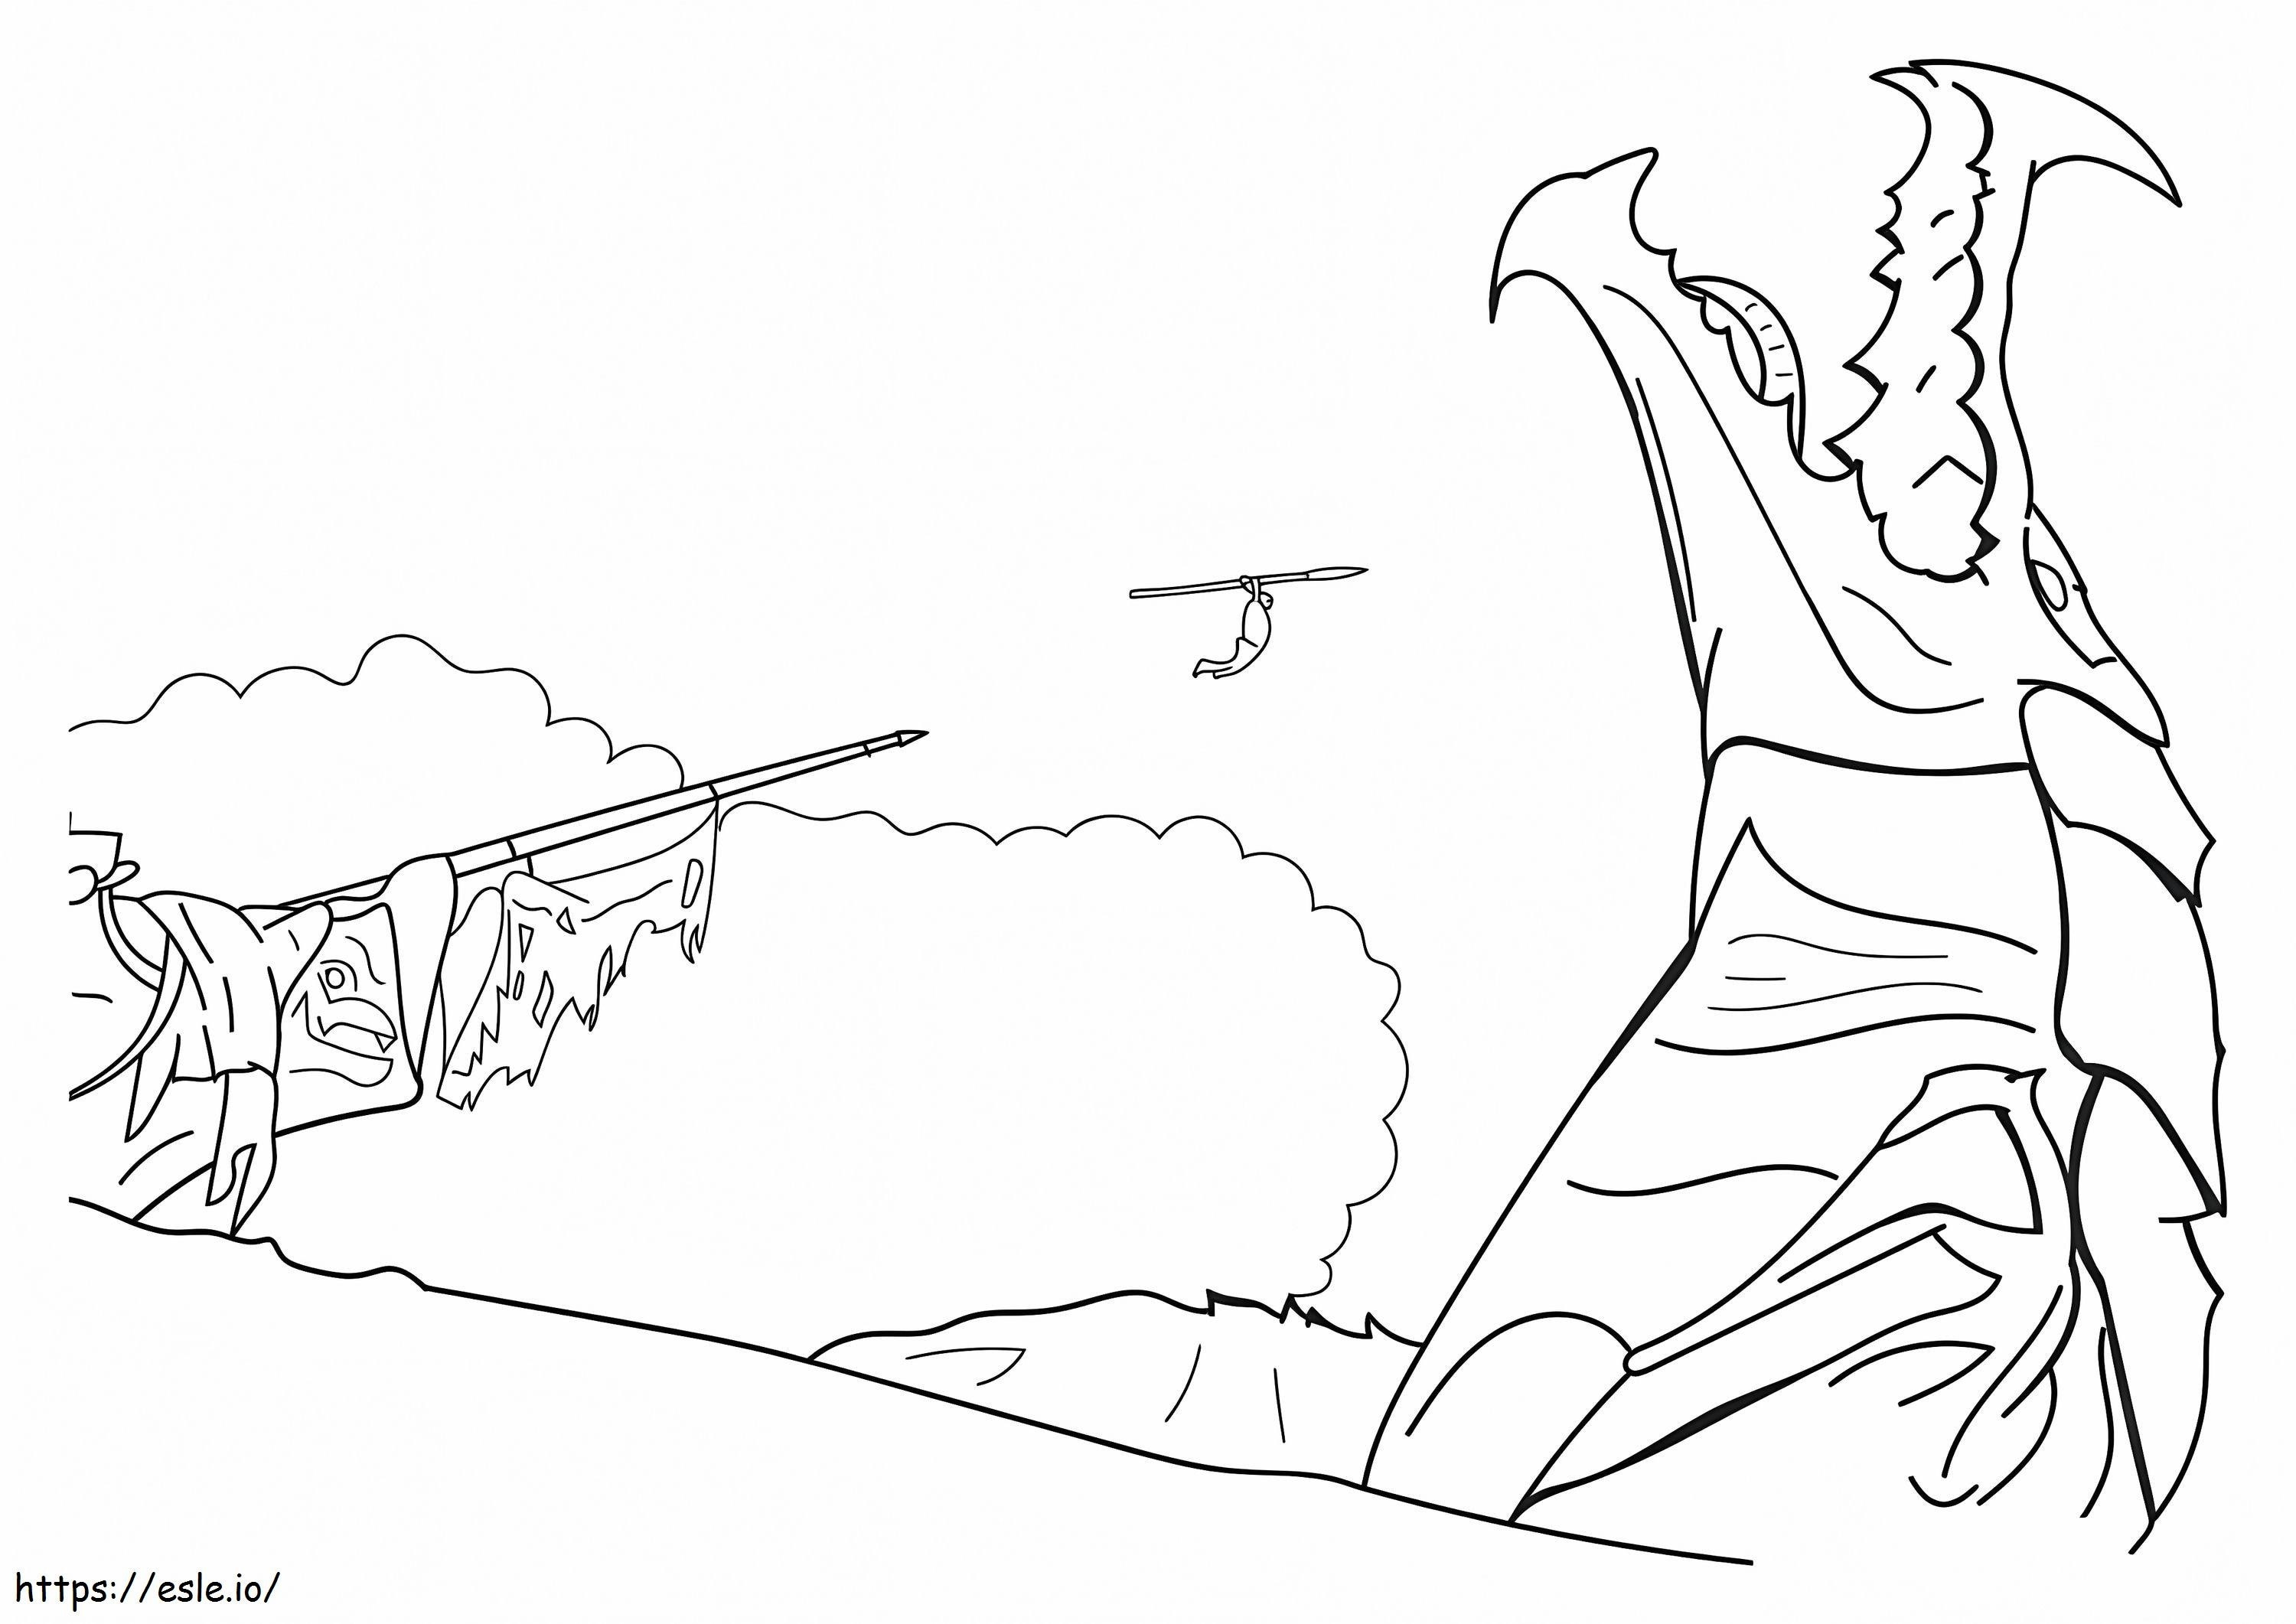 Netflix The Sea Beast coloring page